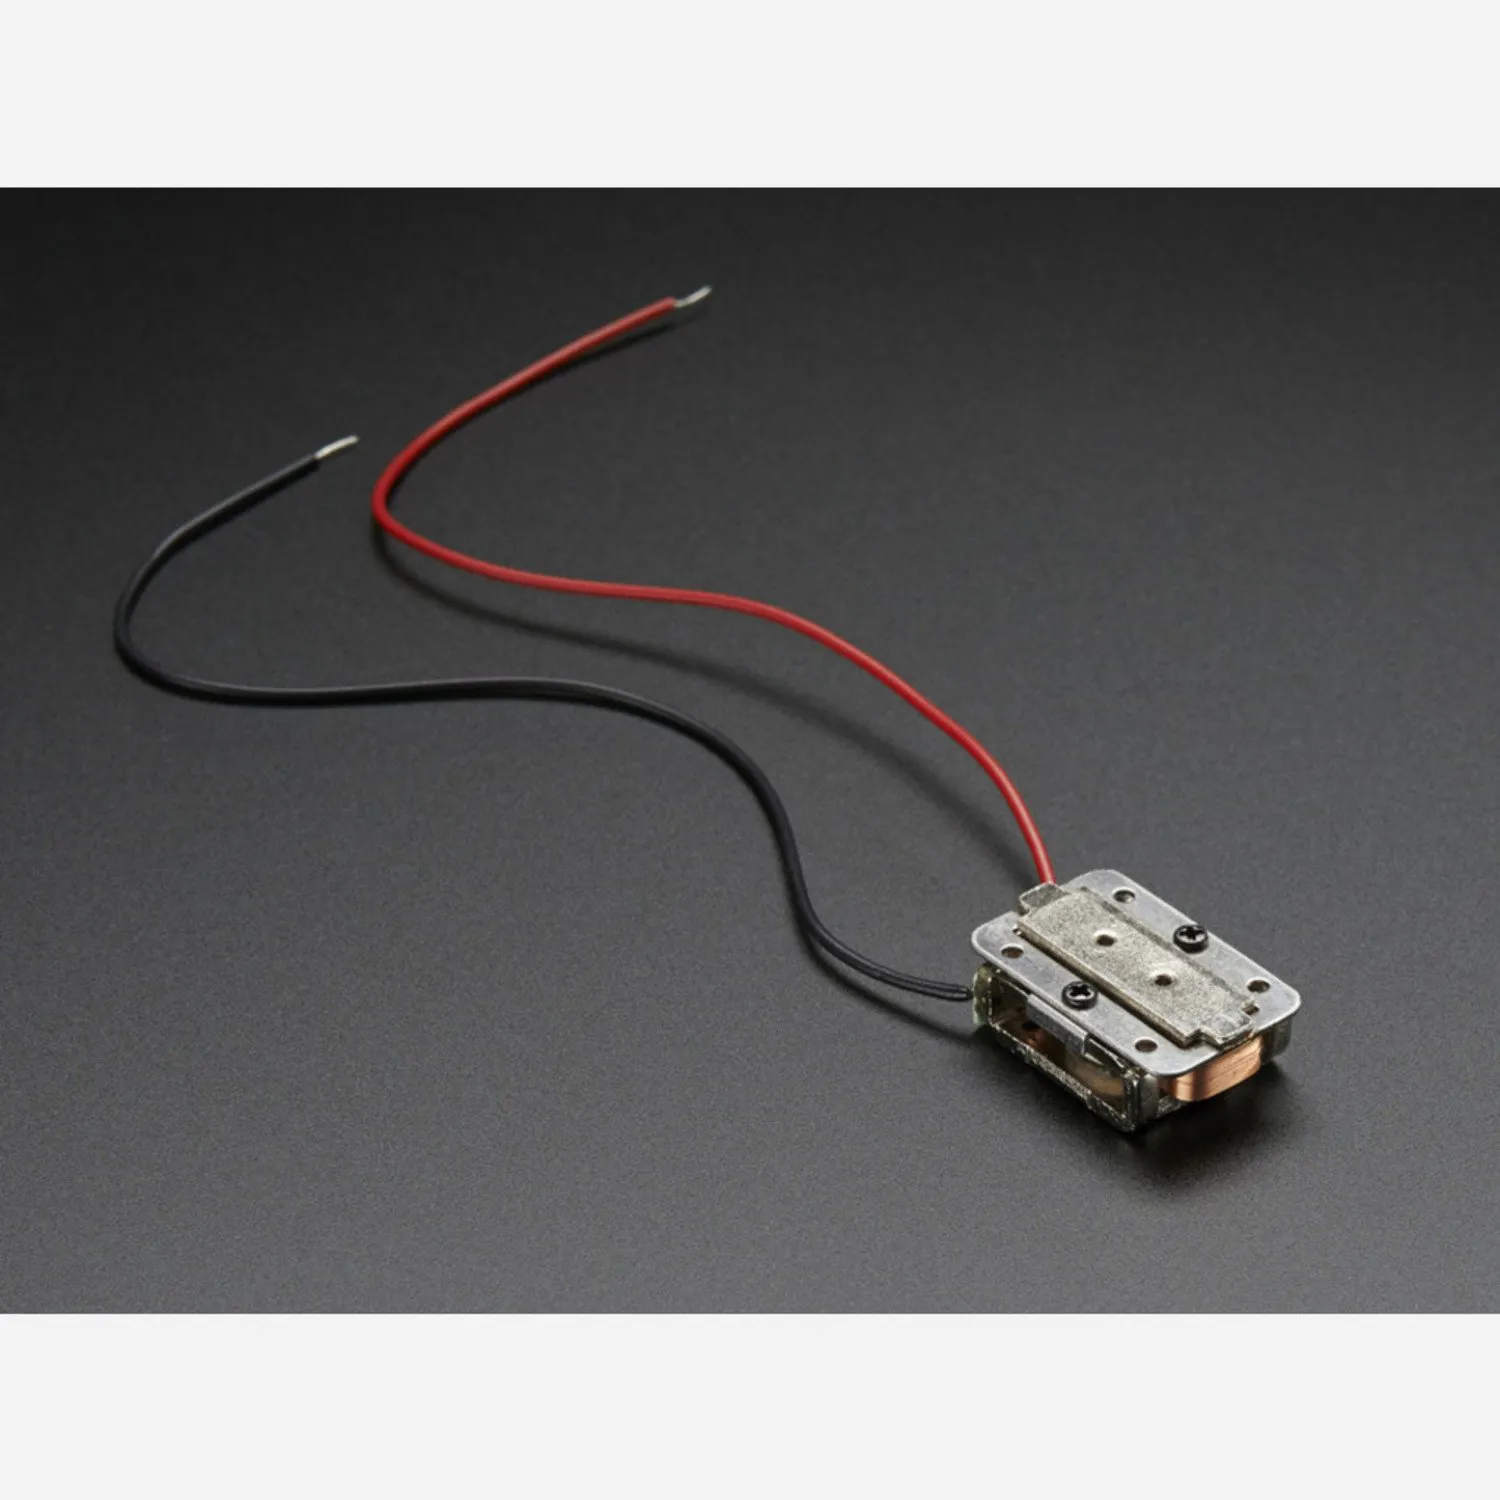 Photo of Bone Conductor Transducer with Wires - 8 Ohm 1 Watt